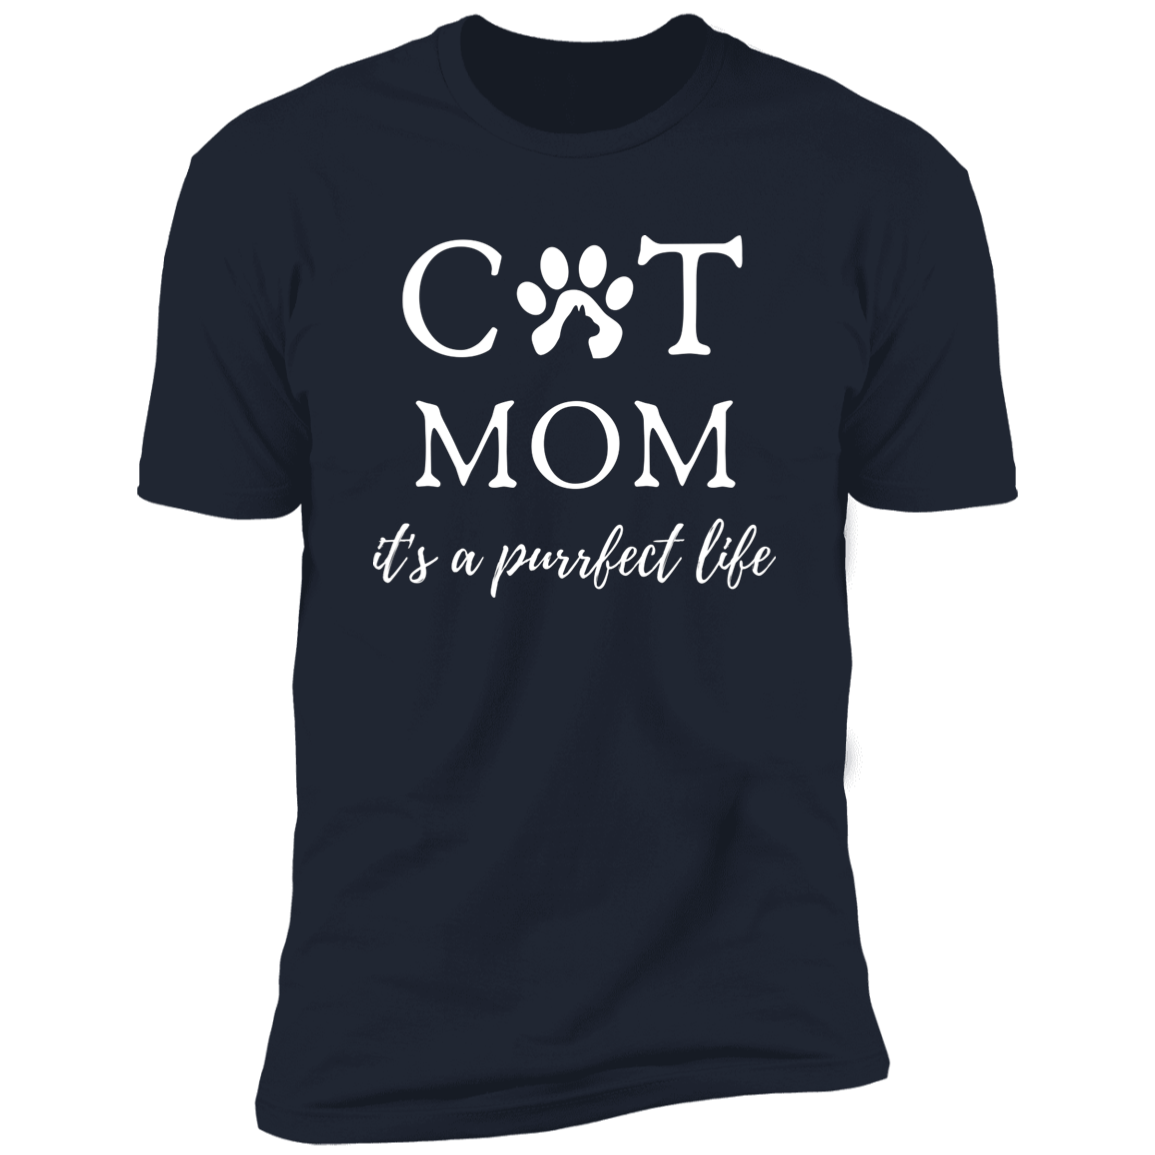 Cat Mom It's a Purrfect Life T-shirt, Cat Mom Shirt for humans, in navy blue